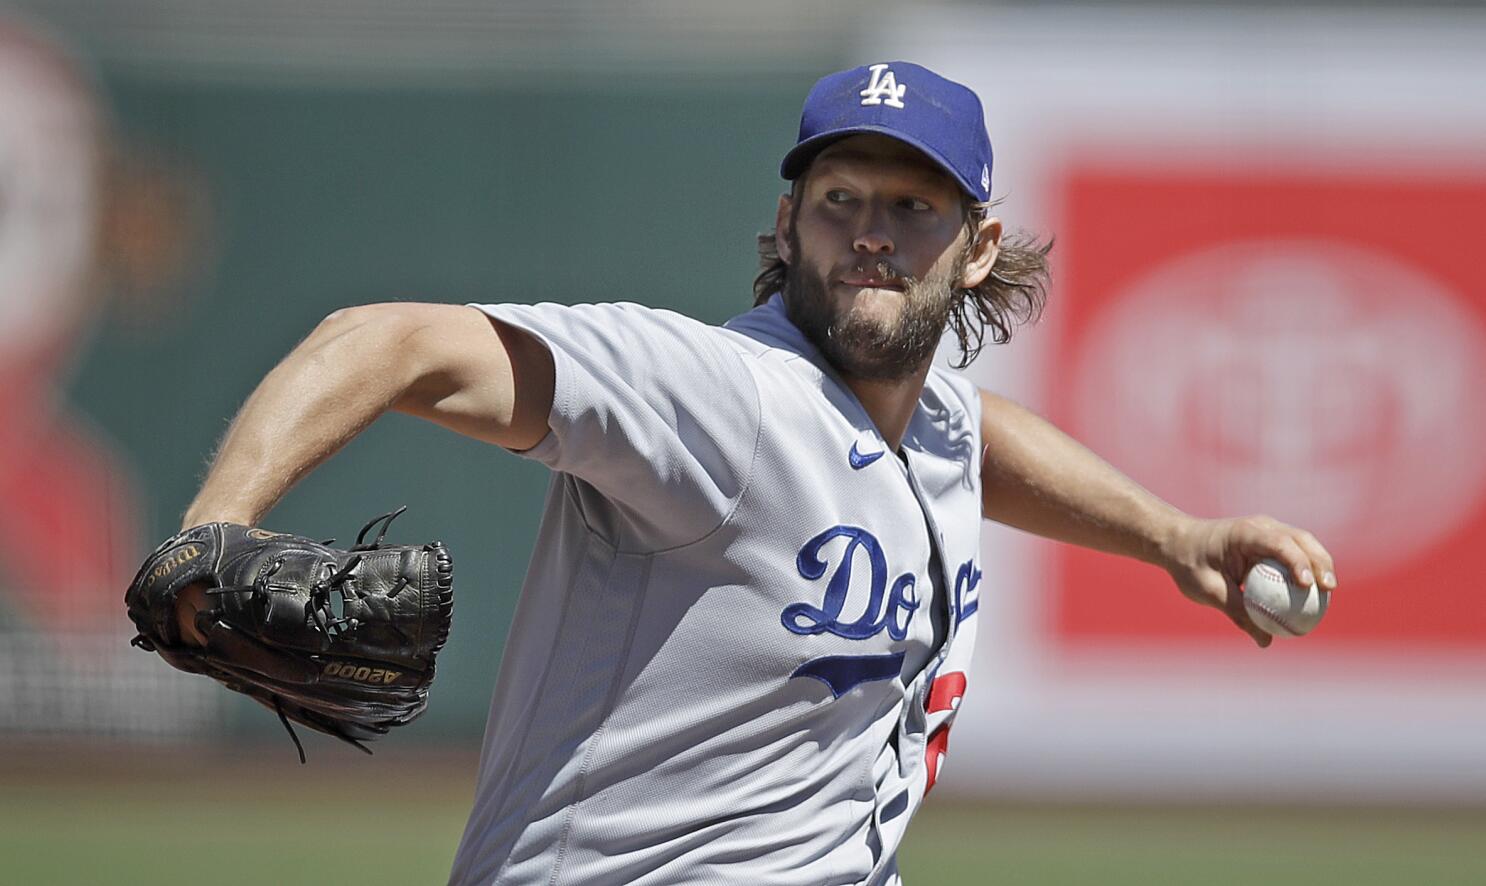 Dodgers News: Clayton Kershaw Remains in Cy Young Contention